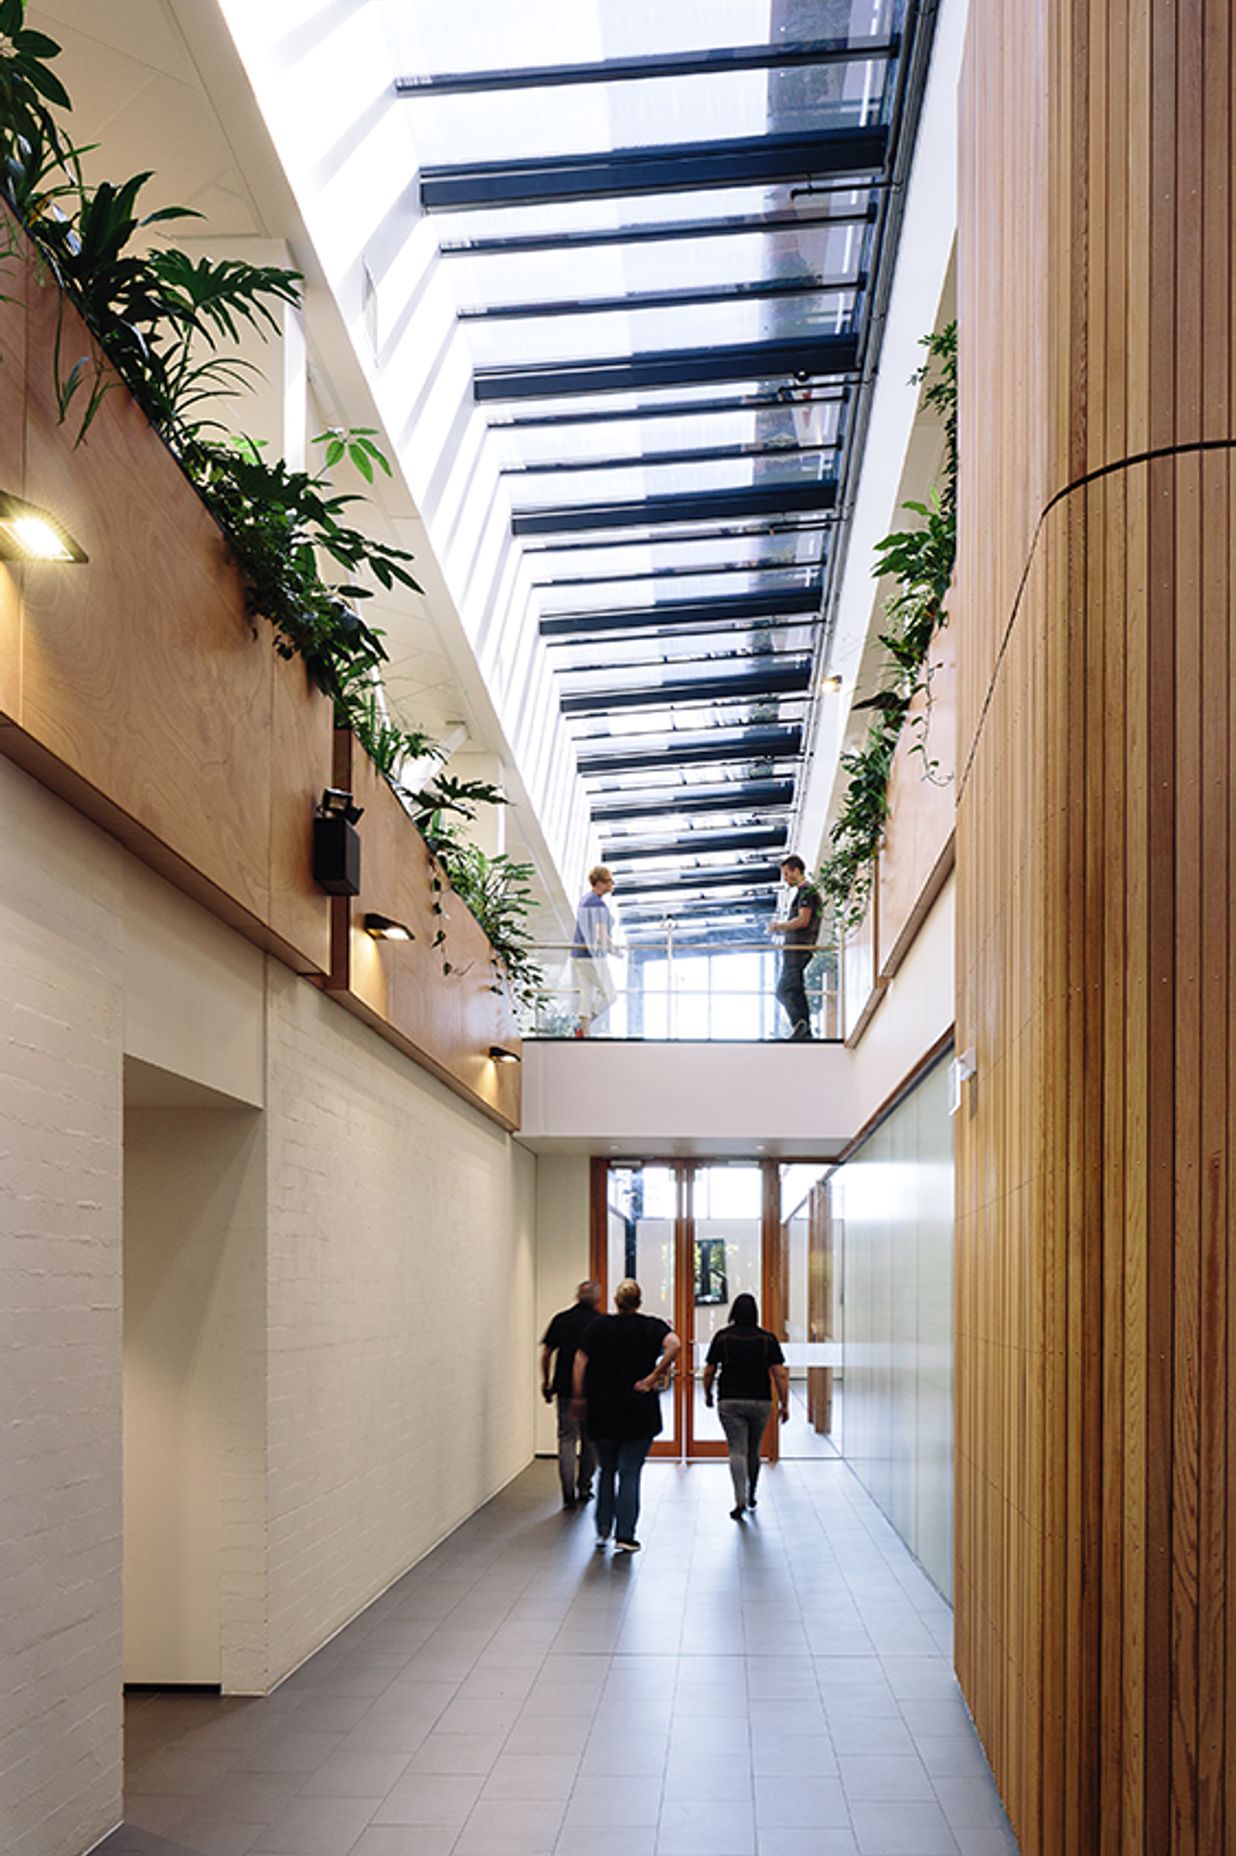 Considered planting within the atrium softens hard surfaces and acts, visually, as a continuation of the Green Frame, connecting occupants with this natural element.